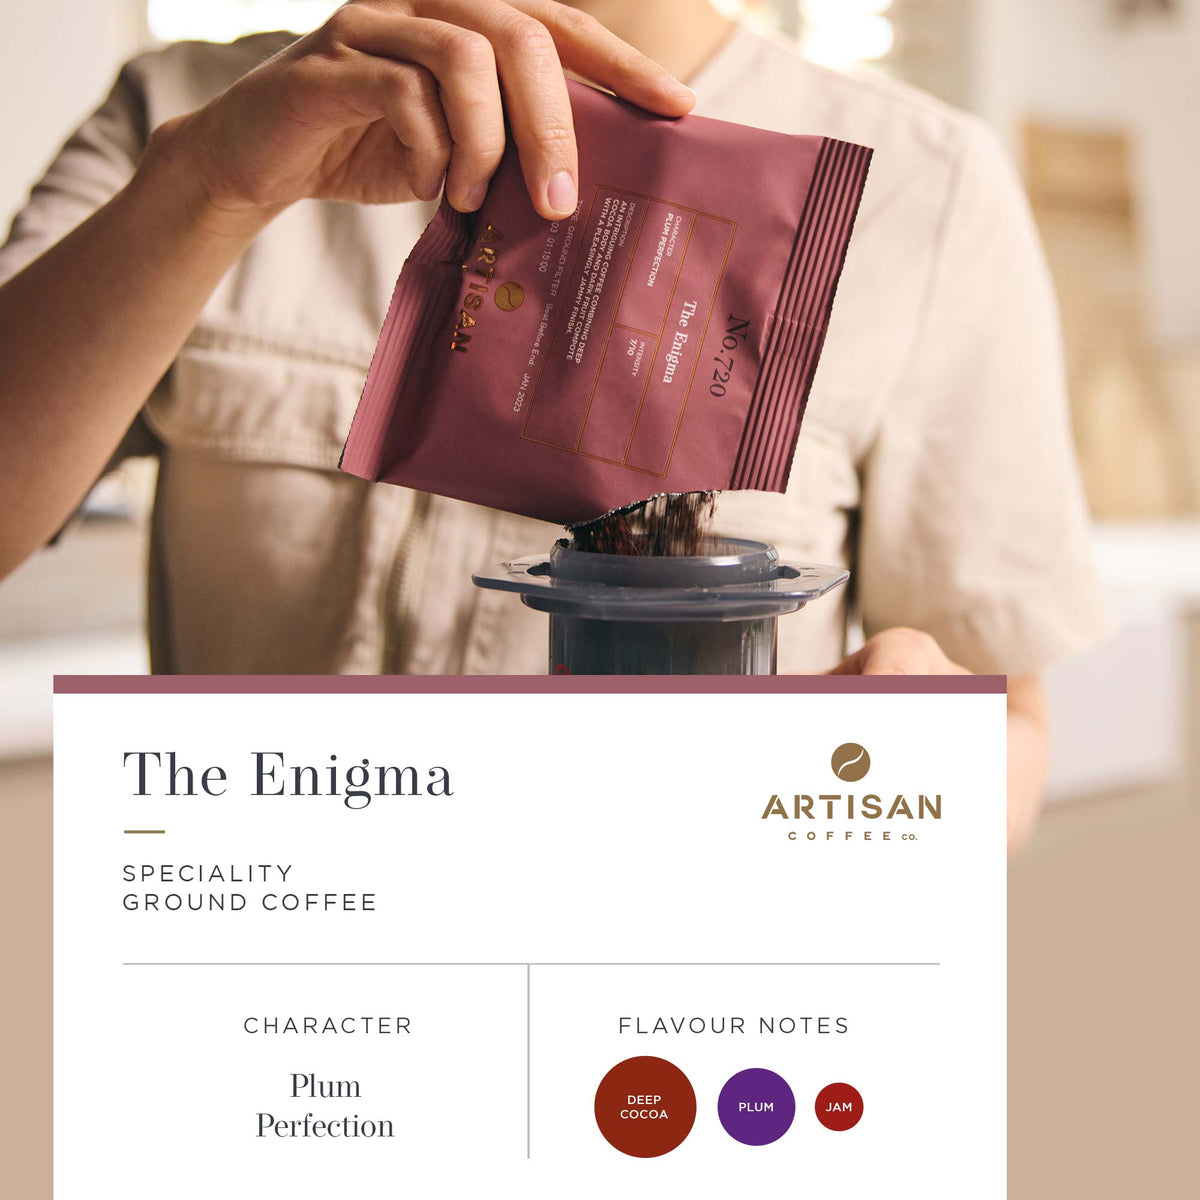 Artisan Coffee Co The Enigma ground coffee Infographic flavour notes